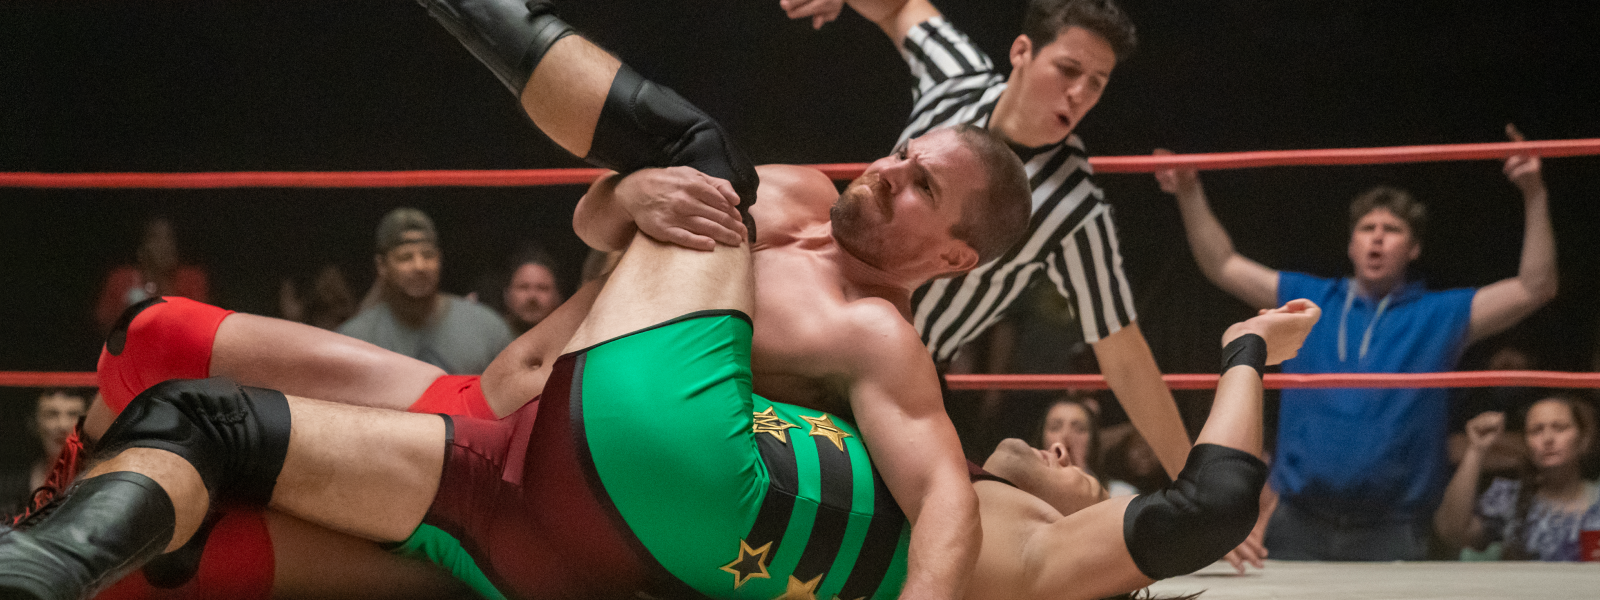 Away from slick stardom: another wrestling world